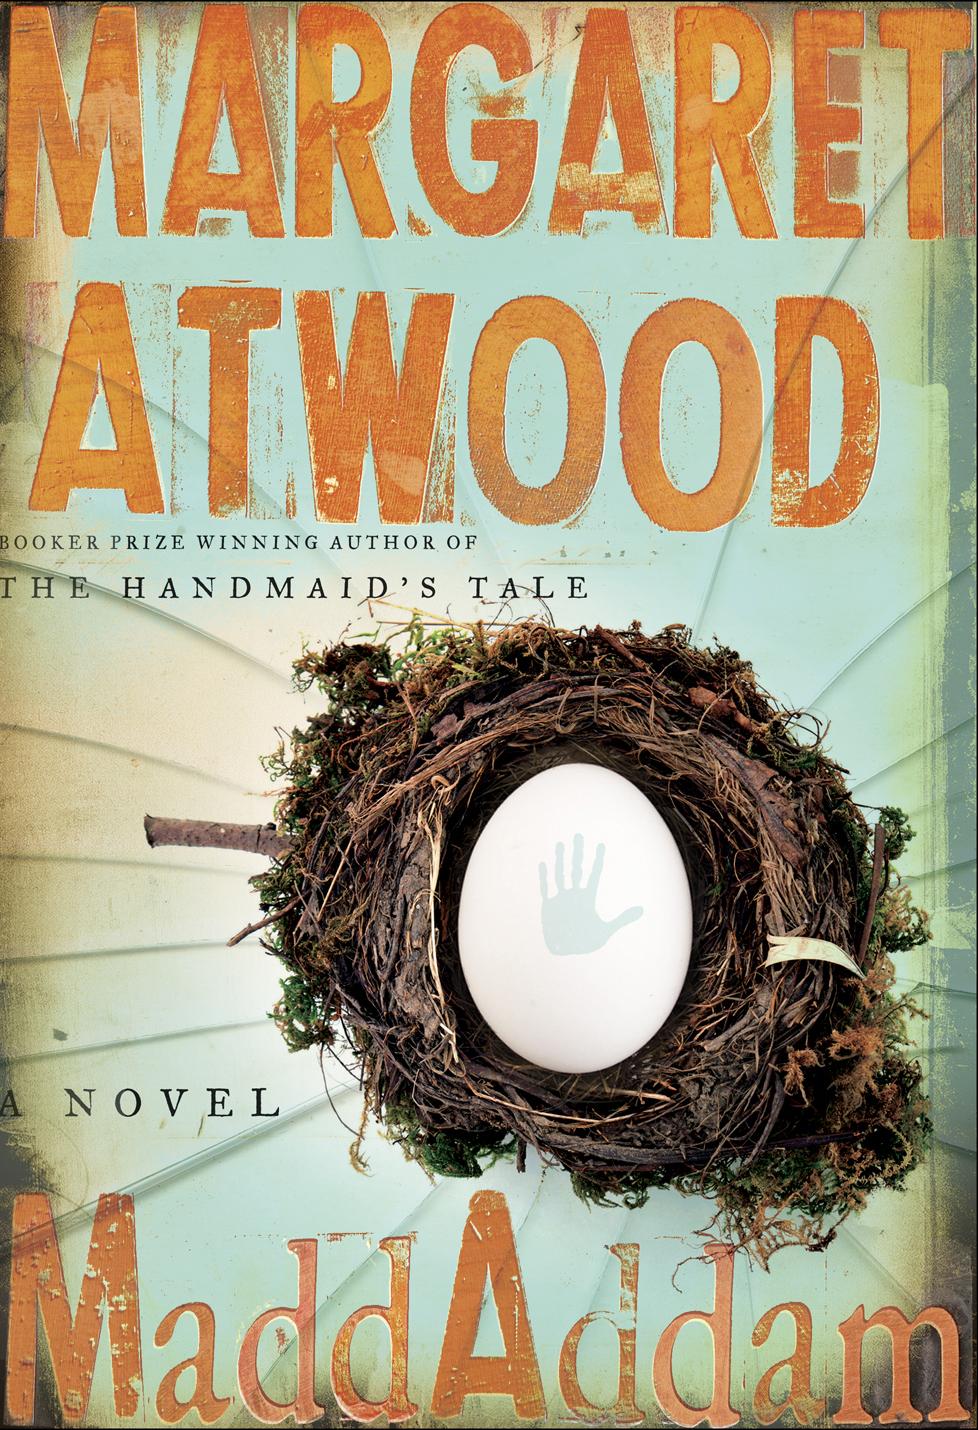 NUVO Daily Edit: MaddAddam by Margaret Atwood